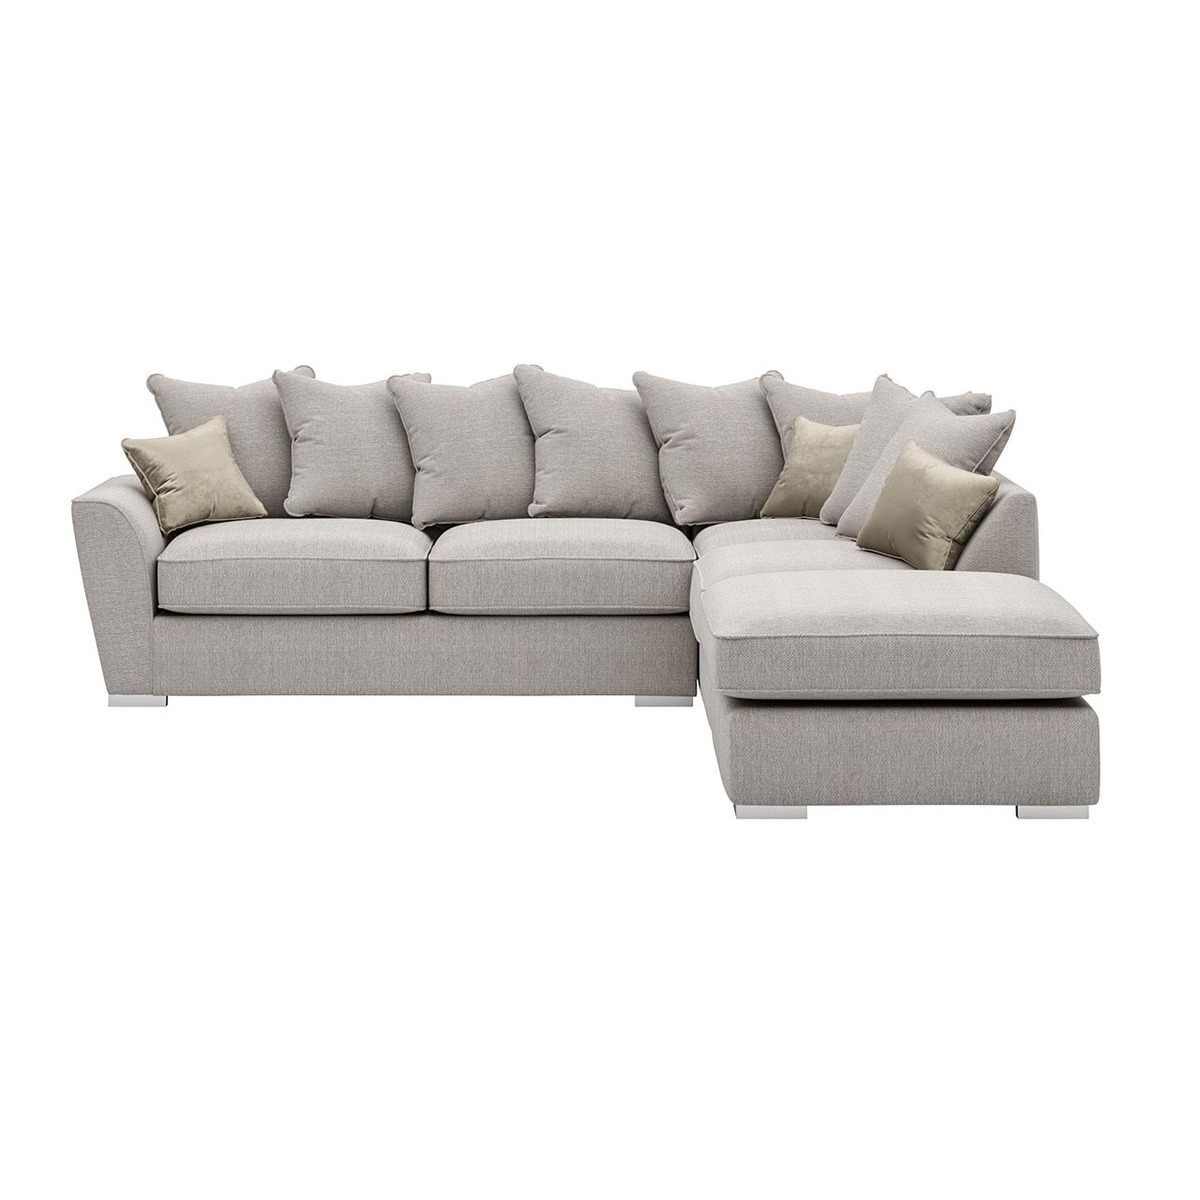 Majestic Right Hand Corner Sofa with Footstool and Loose Back Cushions, cream/mink - image 1